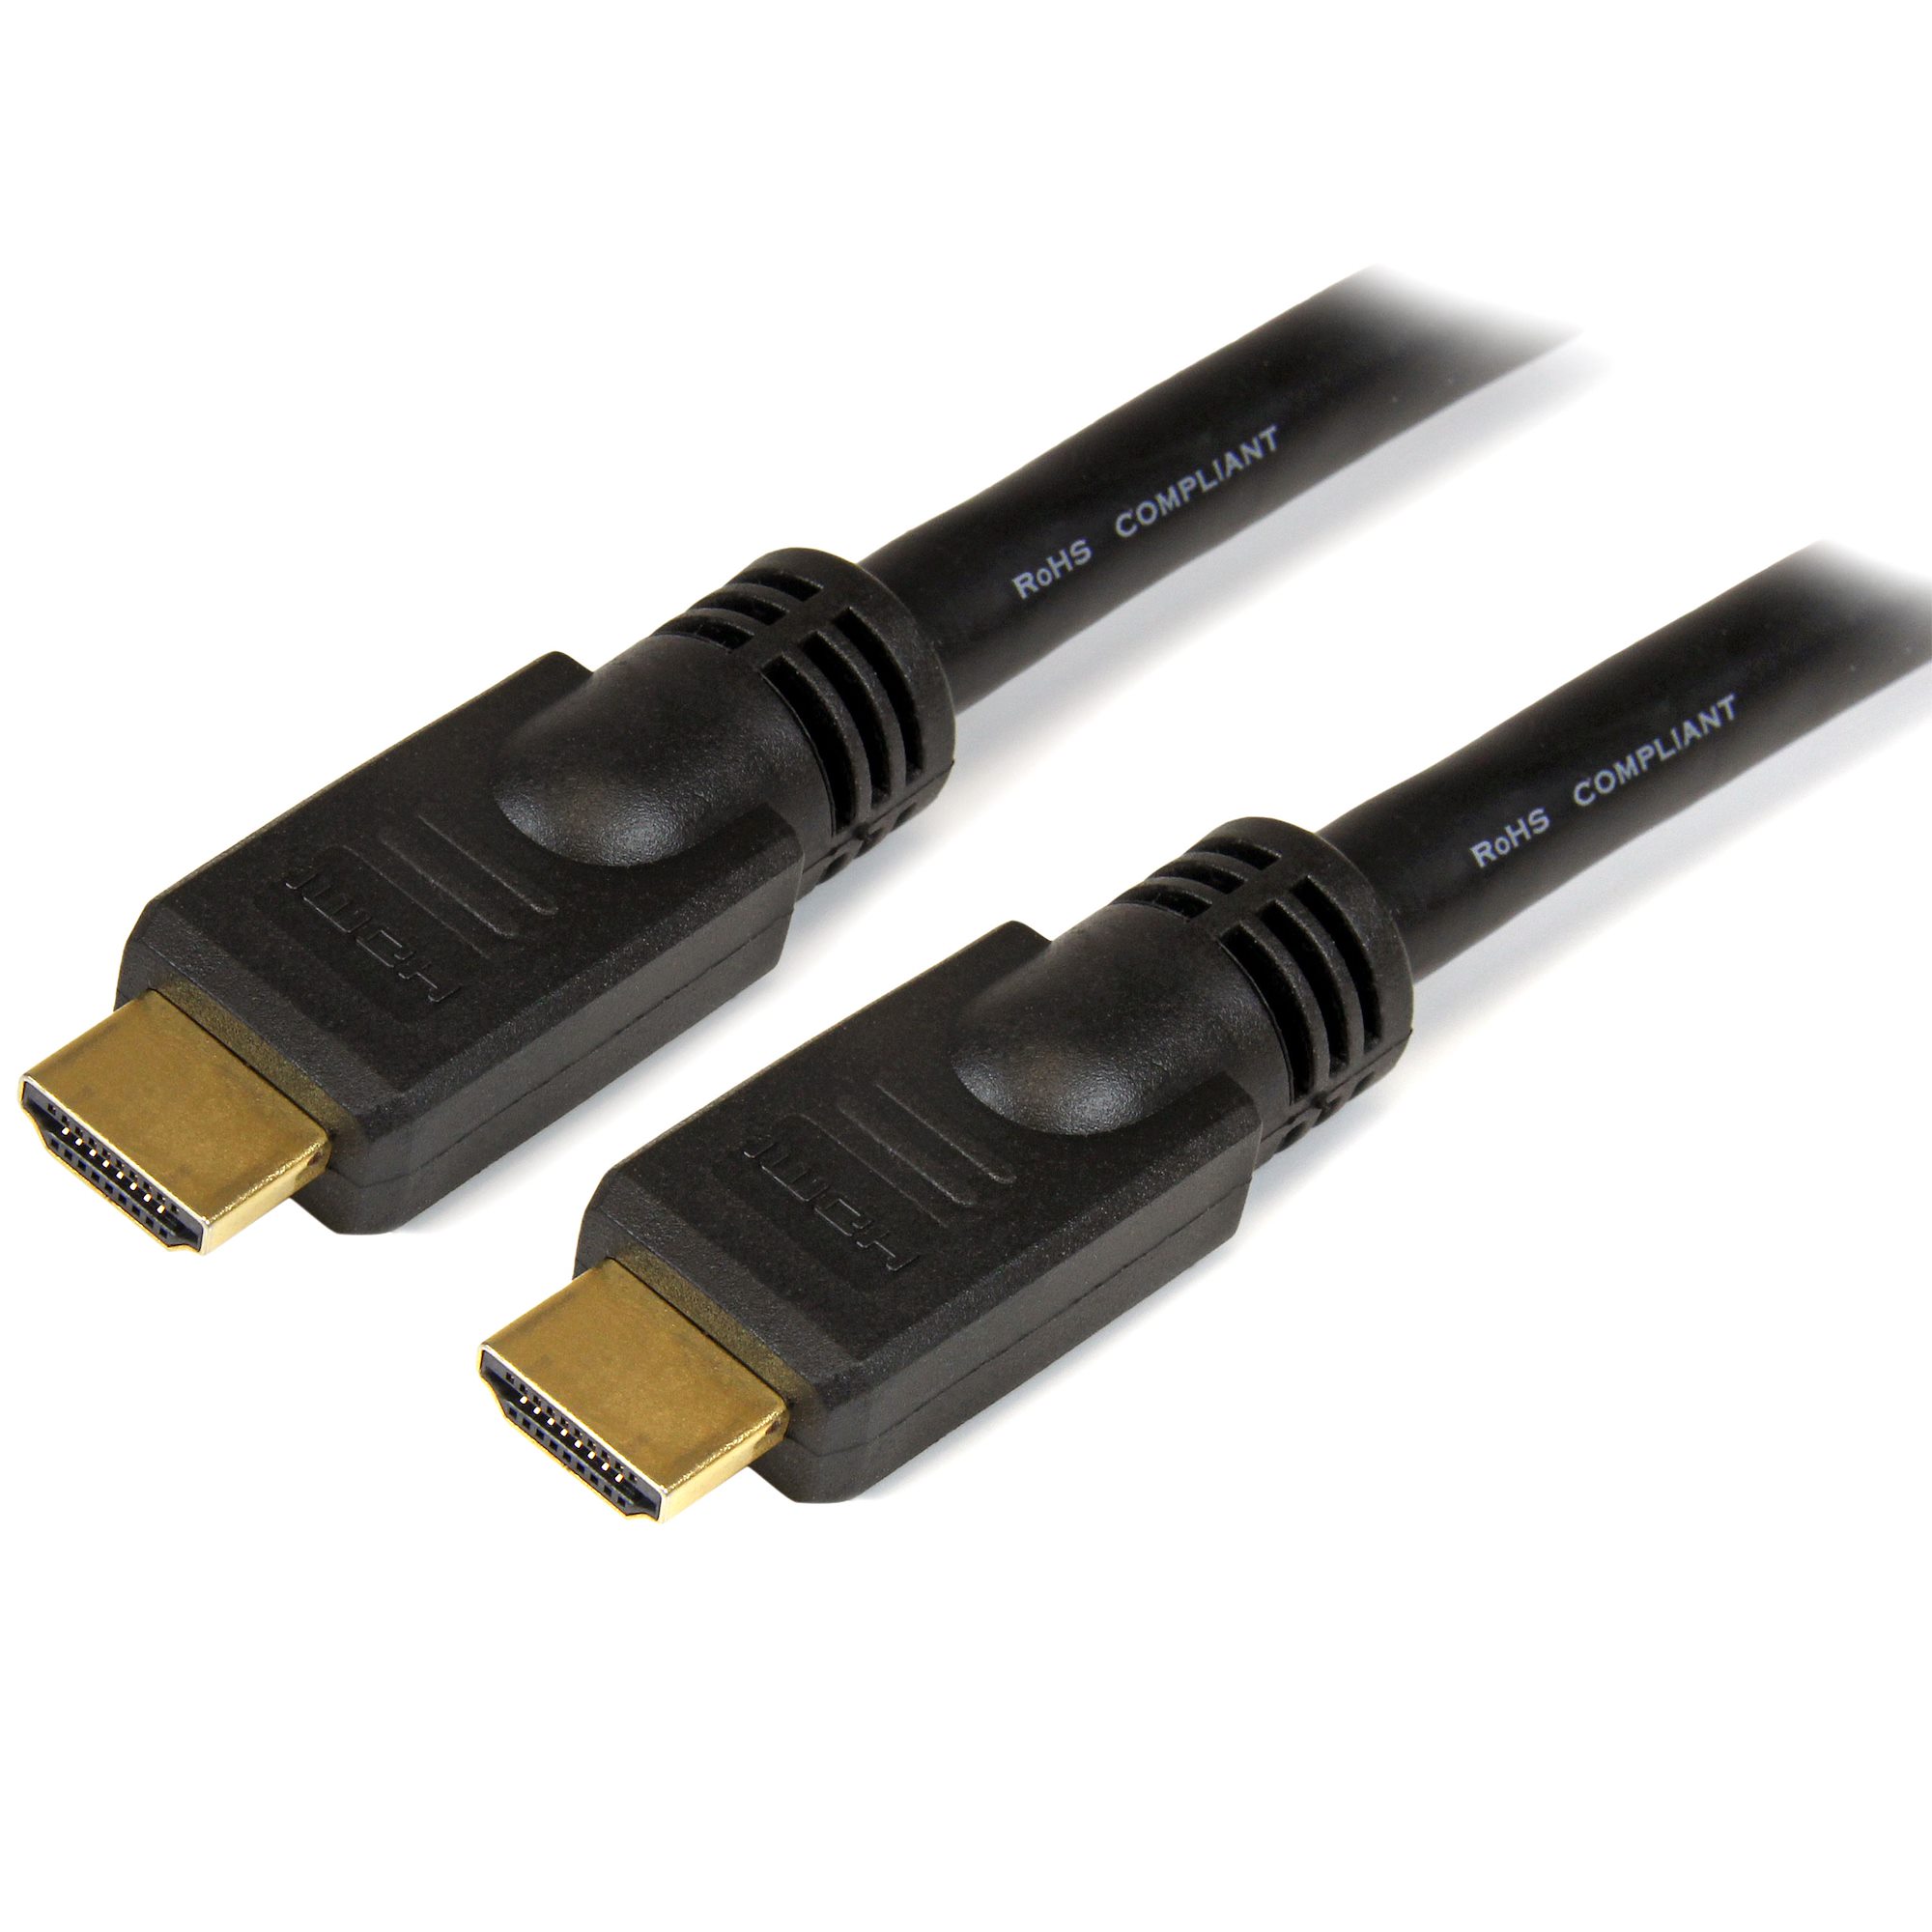 【HDMM30】30 FT HIGH SPEED HDMI CABLE - UL